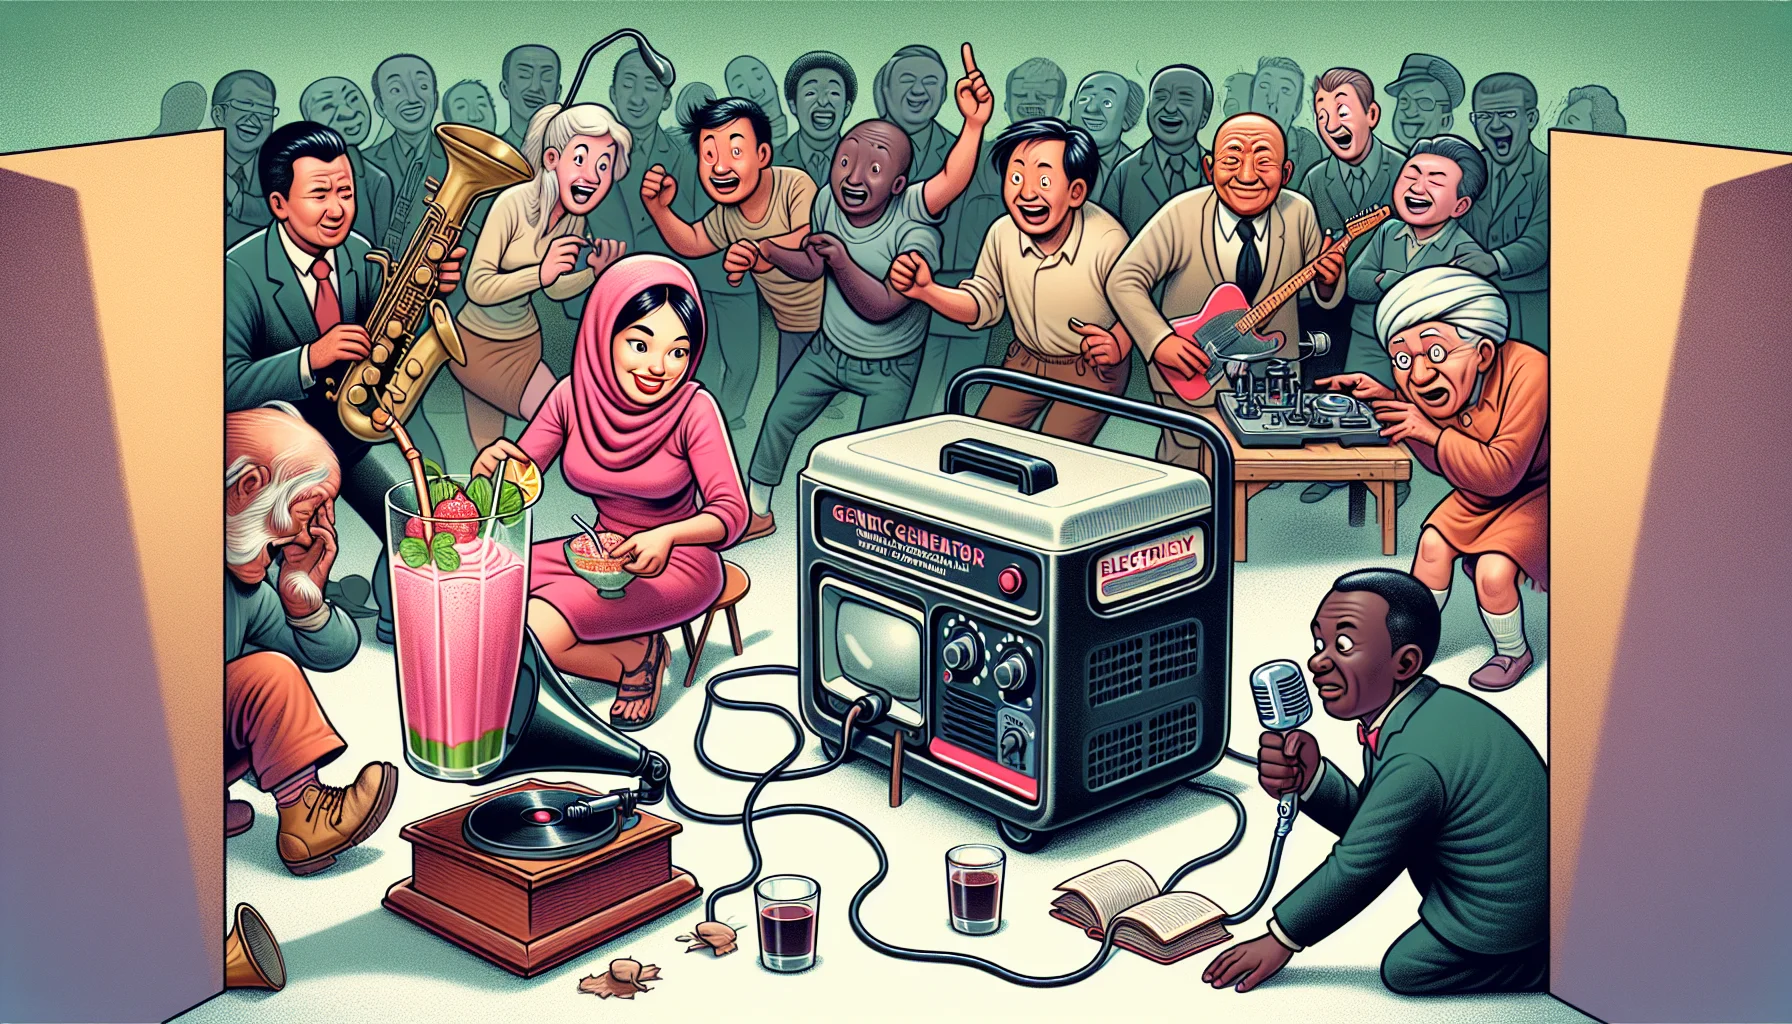 Illustrate a humorous scene that promotes electricity generation, where a generic portable generator is the center of attraction. In this scene, a diverse crowd of people are interacting with the generator. One individual of Asian descent has a bright idea and tries to run a television set, a middle-eastern woman is using it to power a giant blender making a huge smoothie, and an elderly black man finds it amusing to power his vintage gramophone. Others look on with a mixture of bemusement and surprise at these quirky applications of the portable generator.